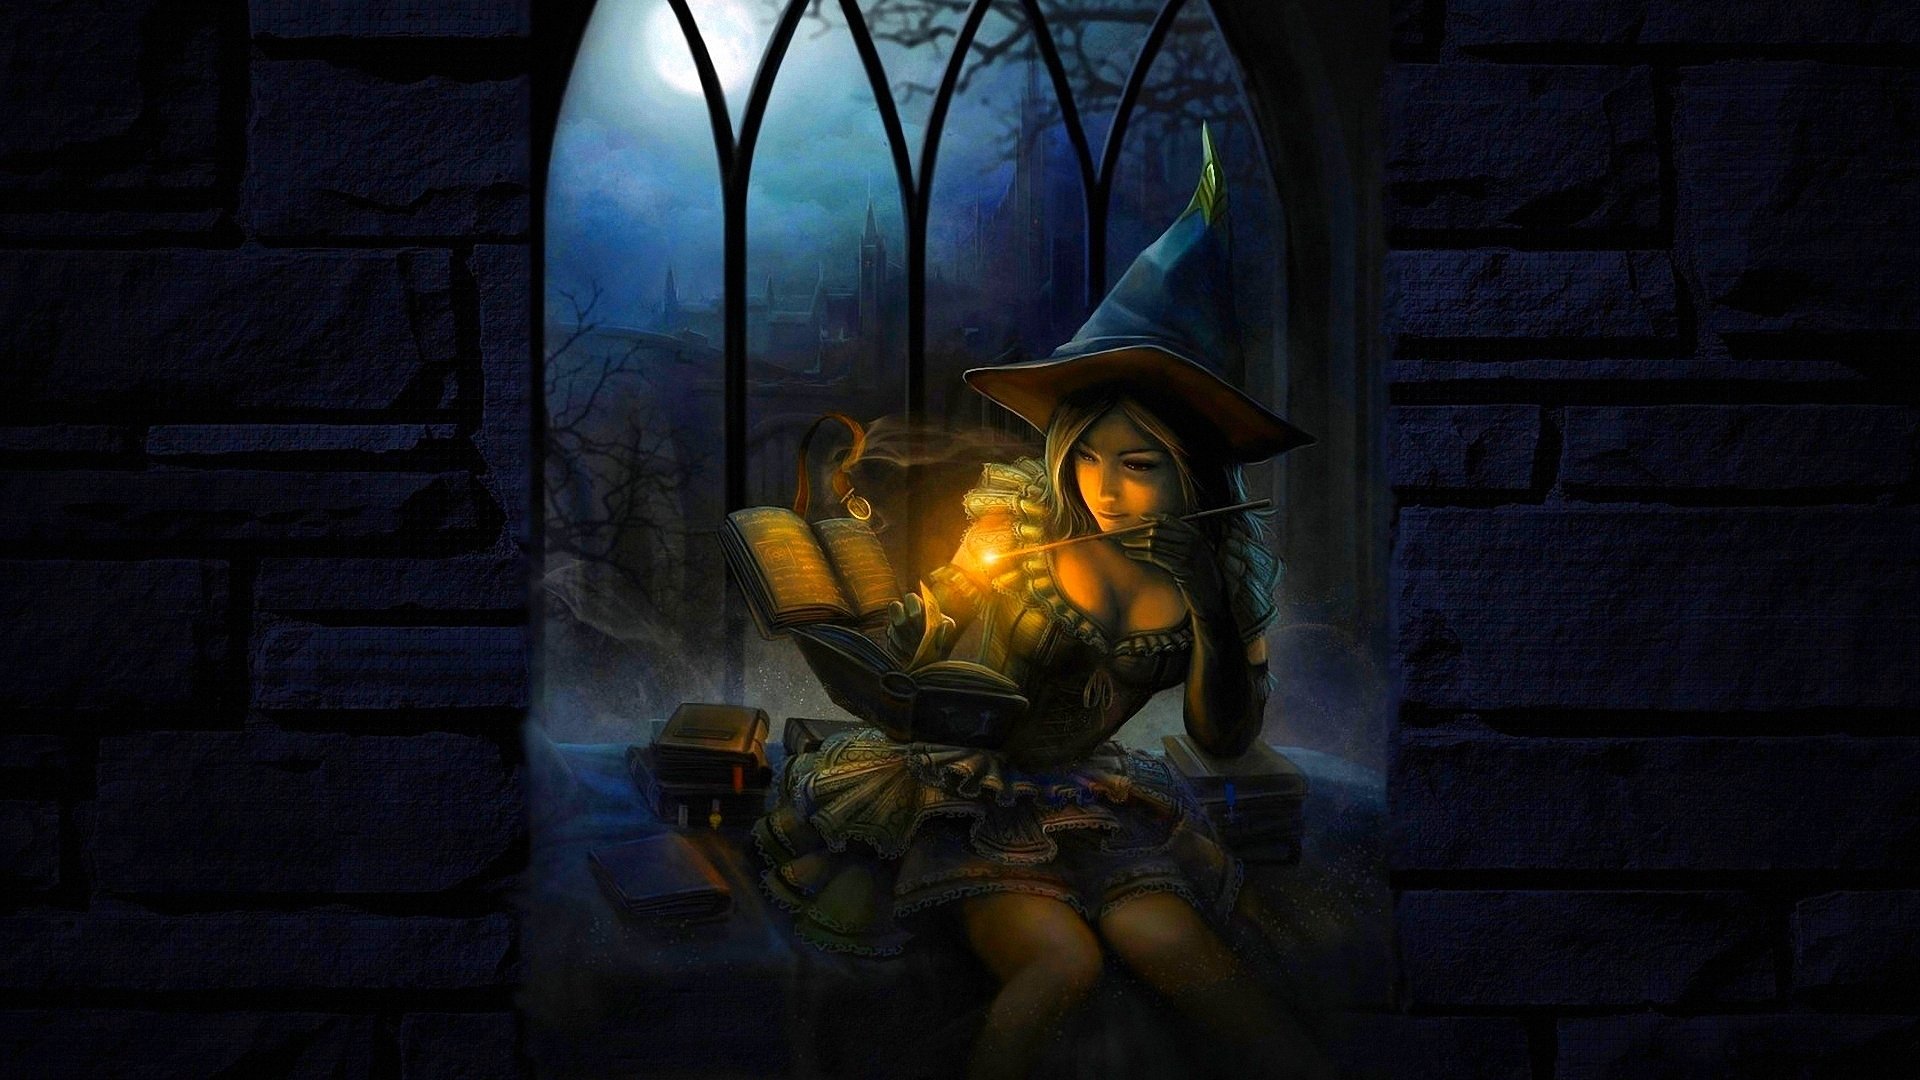  Witch  HD  Wallpaper  Background Image 1920x1080 ID 